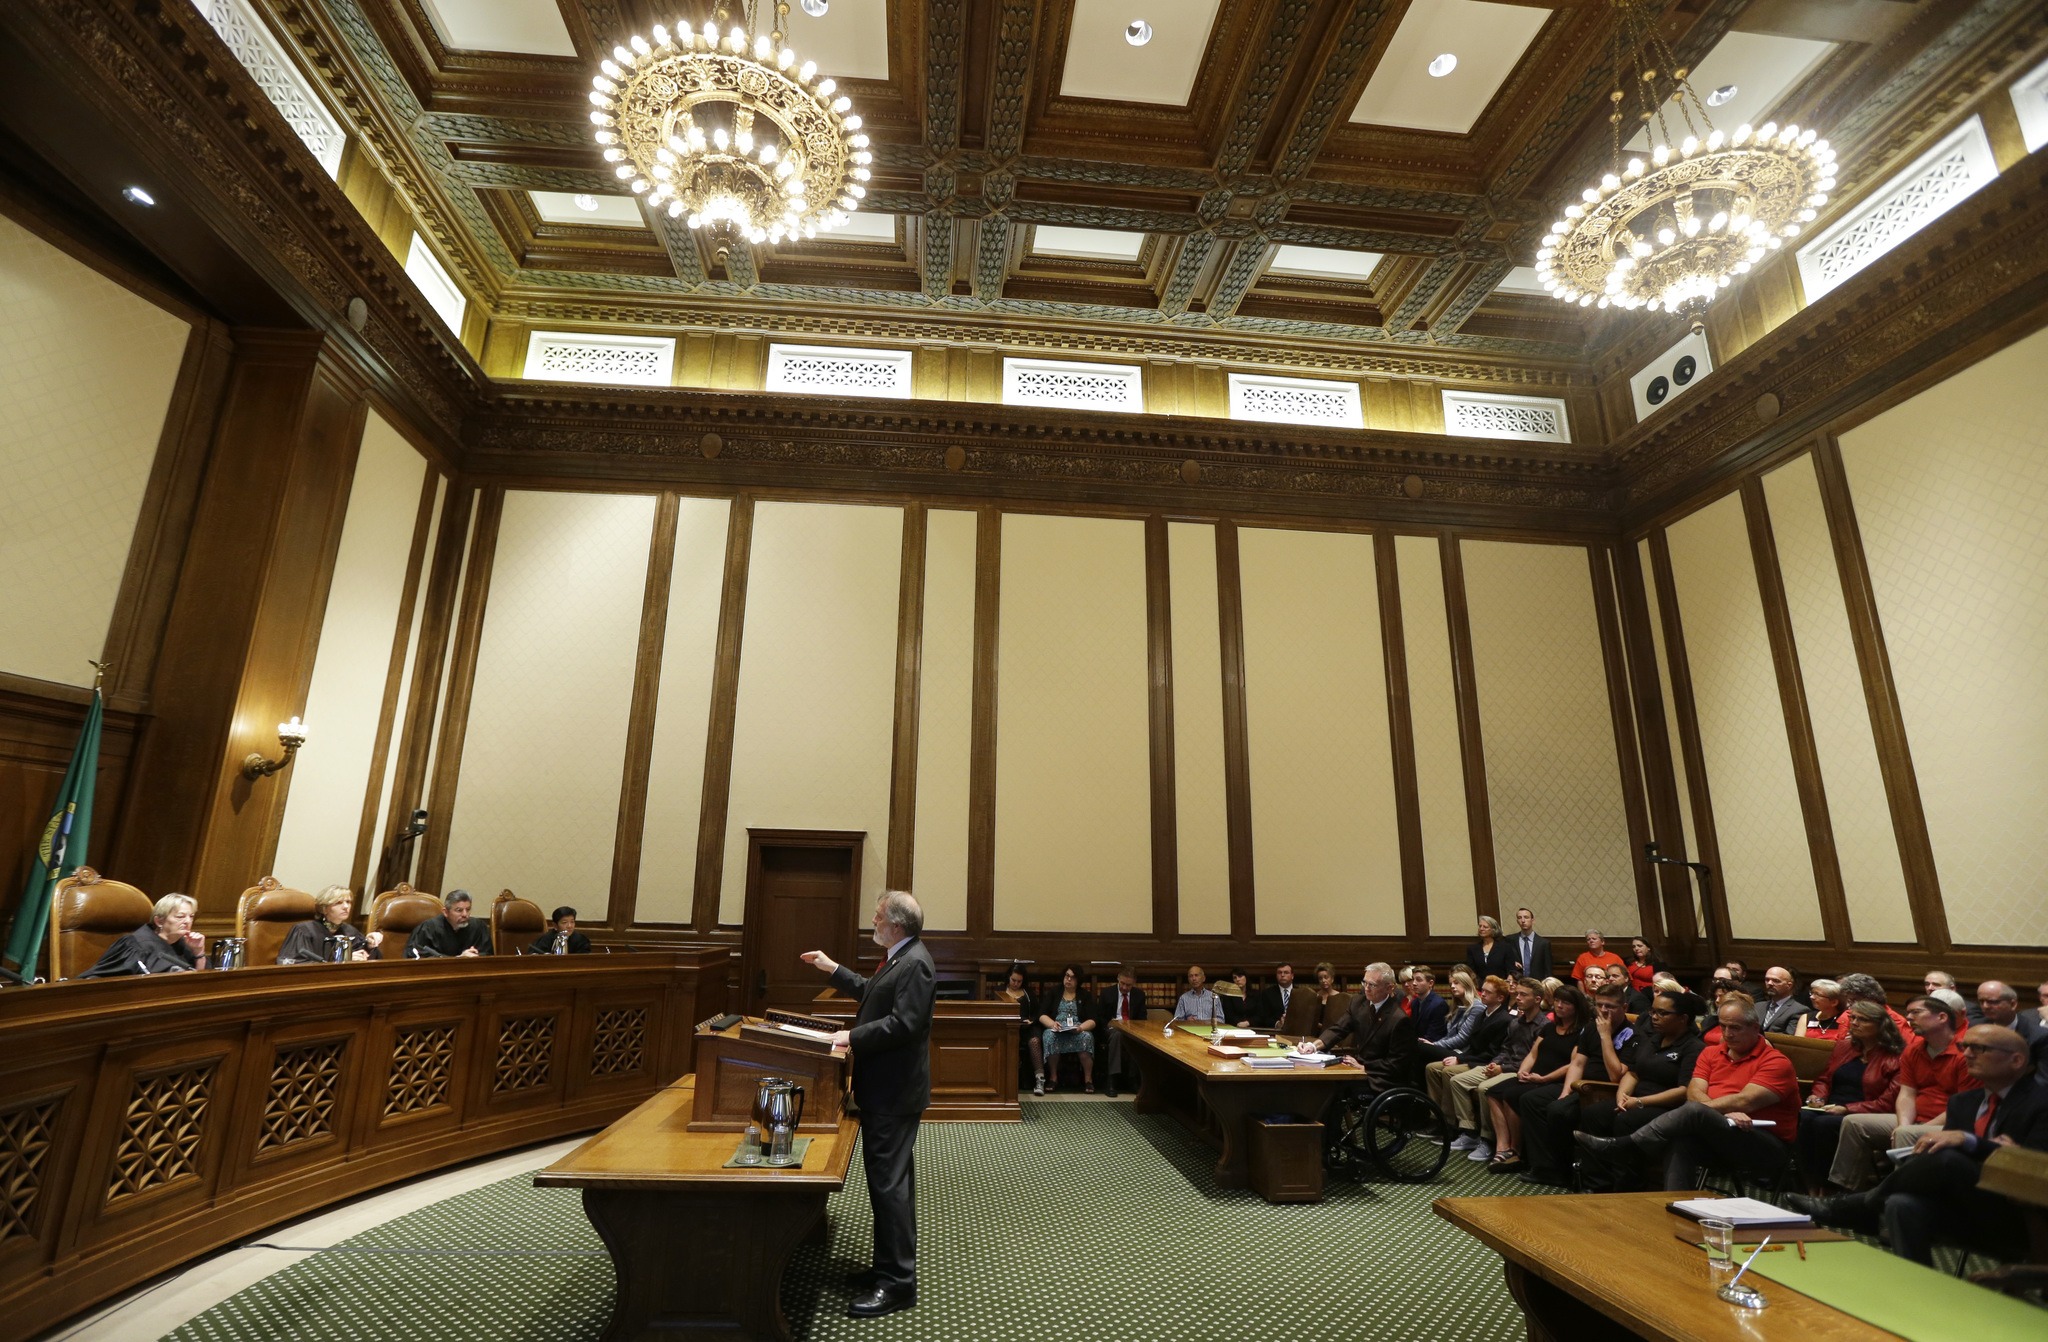 Alan Copsey, center, a deputy attorney general for the state of Washington, speaks during a hearing before the state Supreme Court regarding a lawsuit against the state over education funding on Wednesday in Olympia. (Ted S. Warren/The Associated Press)